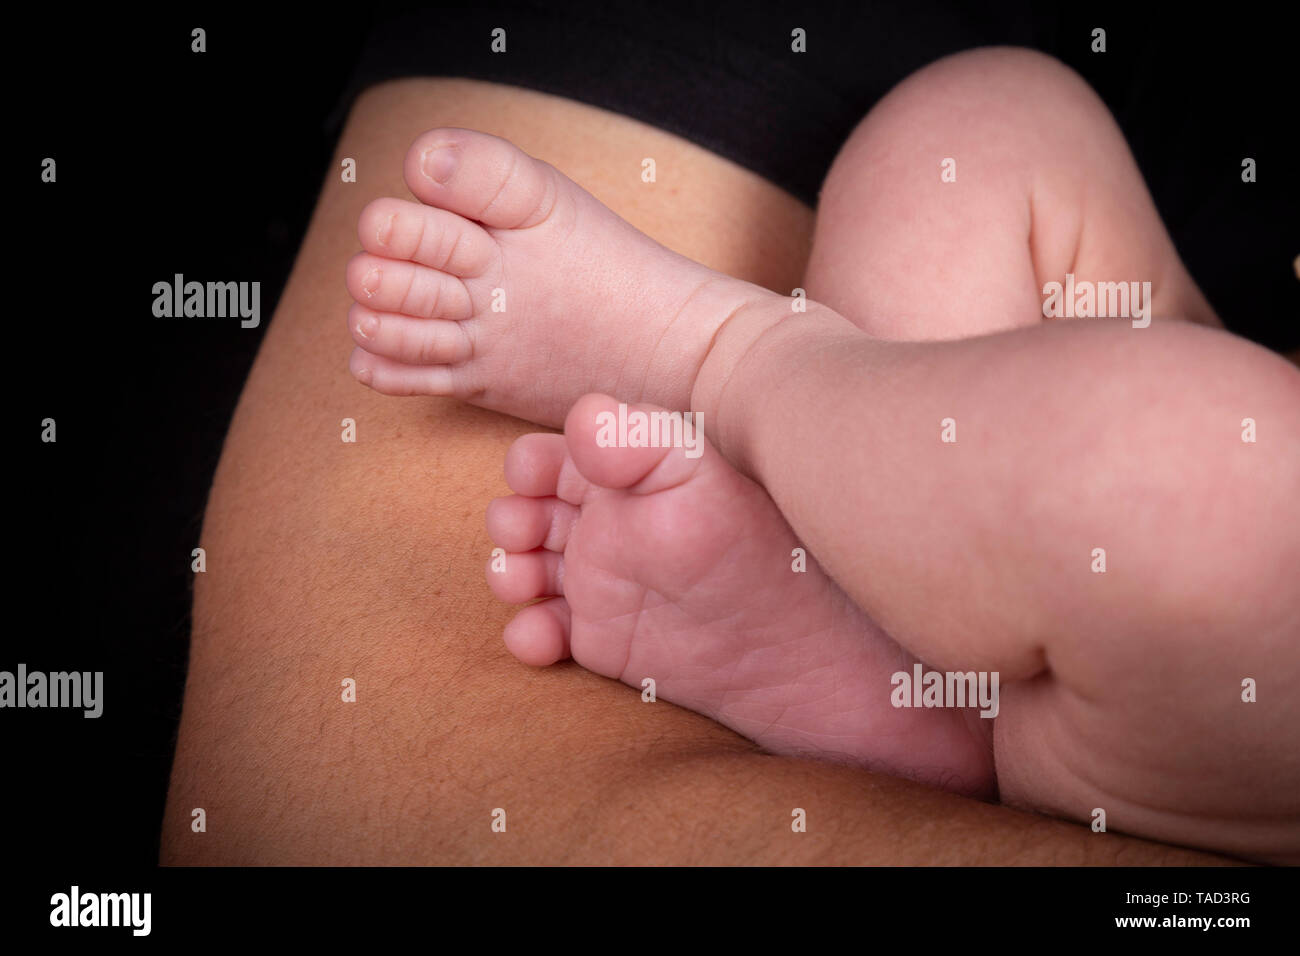 Baby feet collected by his father's arms Stock Photo